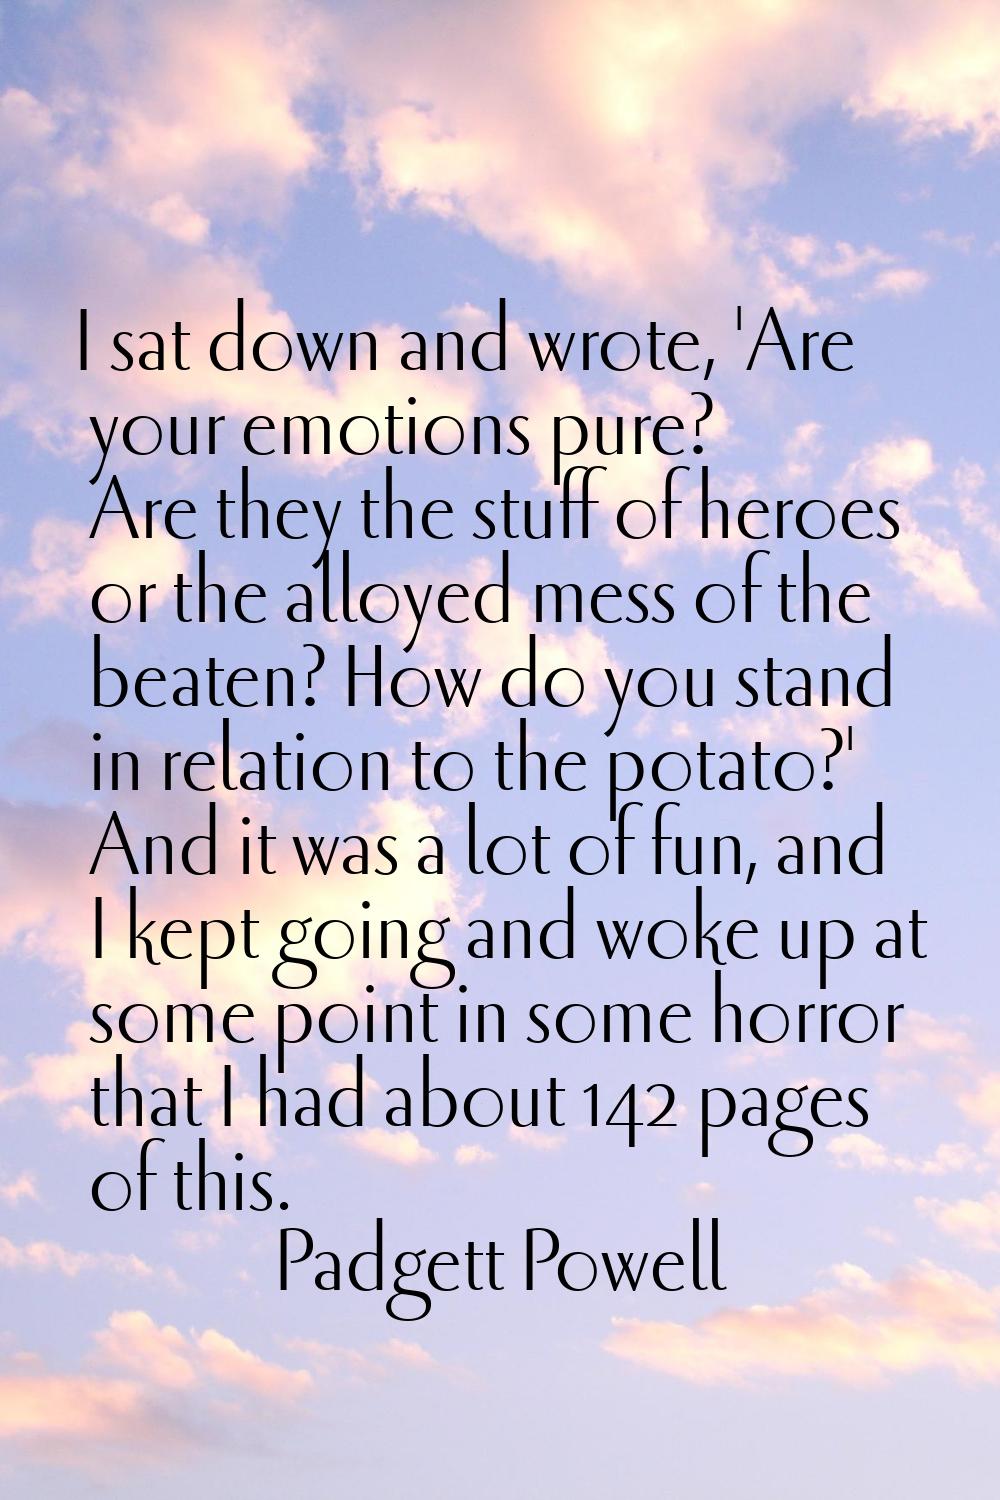 I sat down and wrote, 'Are your emotions pure? Are they the stuff of heroes or the alloyed mess of 